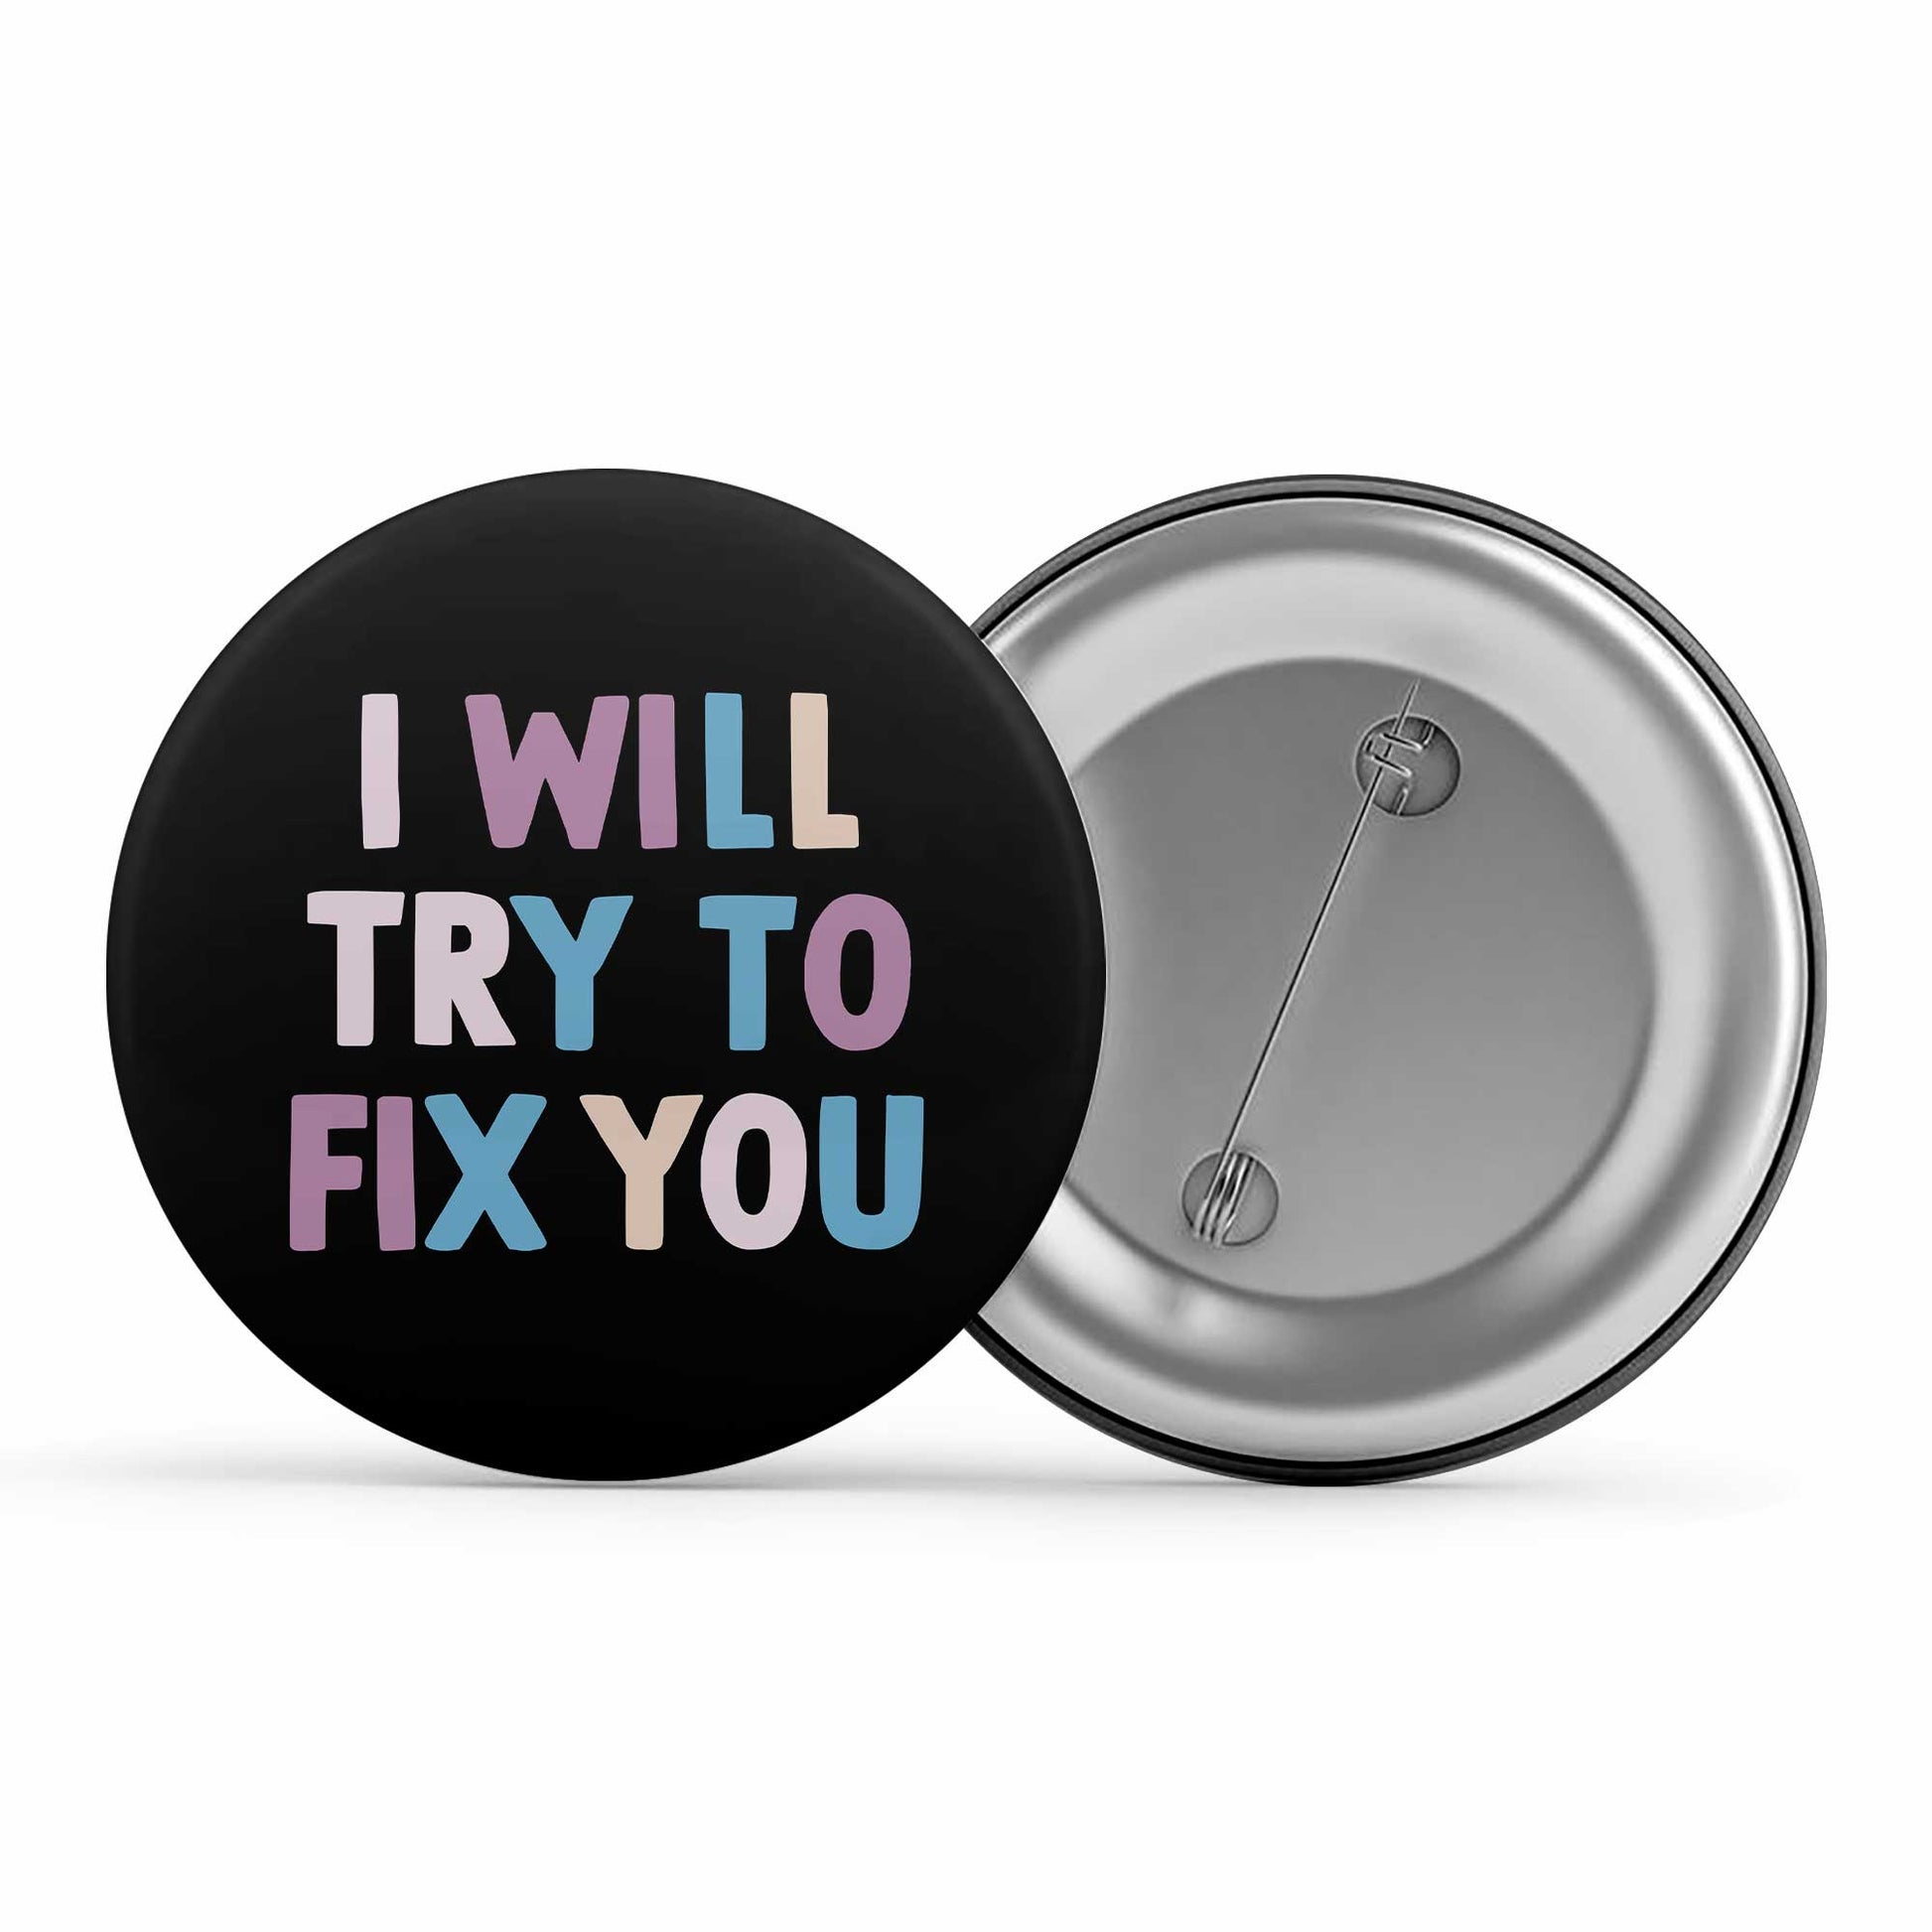 coldplay i will try to fix you badge pin button music band buy online india the banyan tee tbt men women girls boys unisex